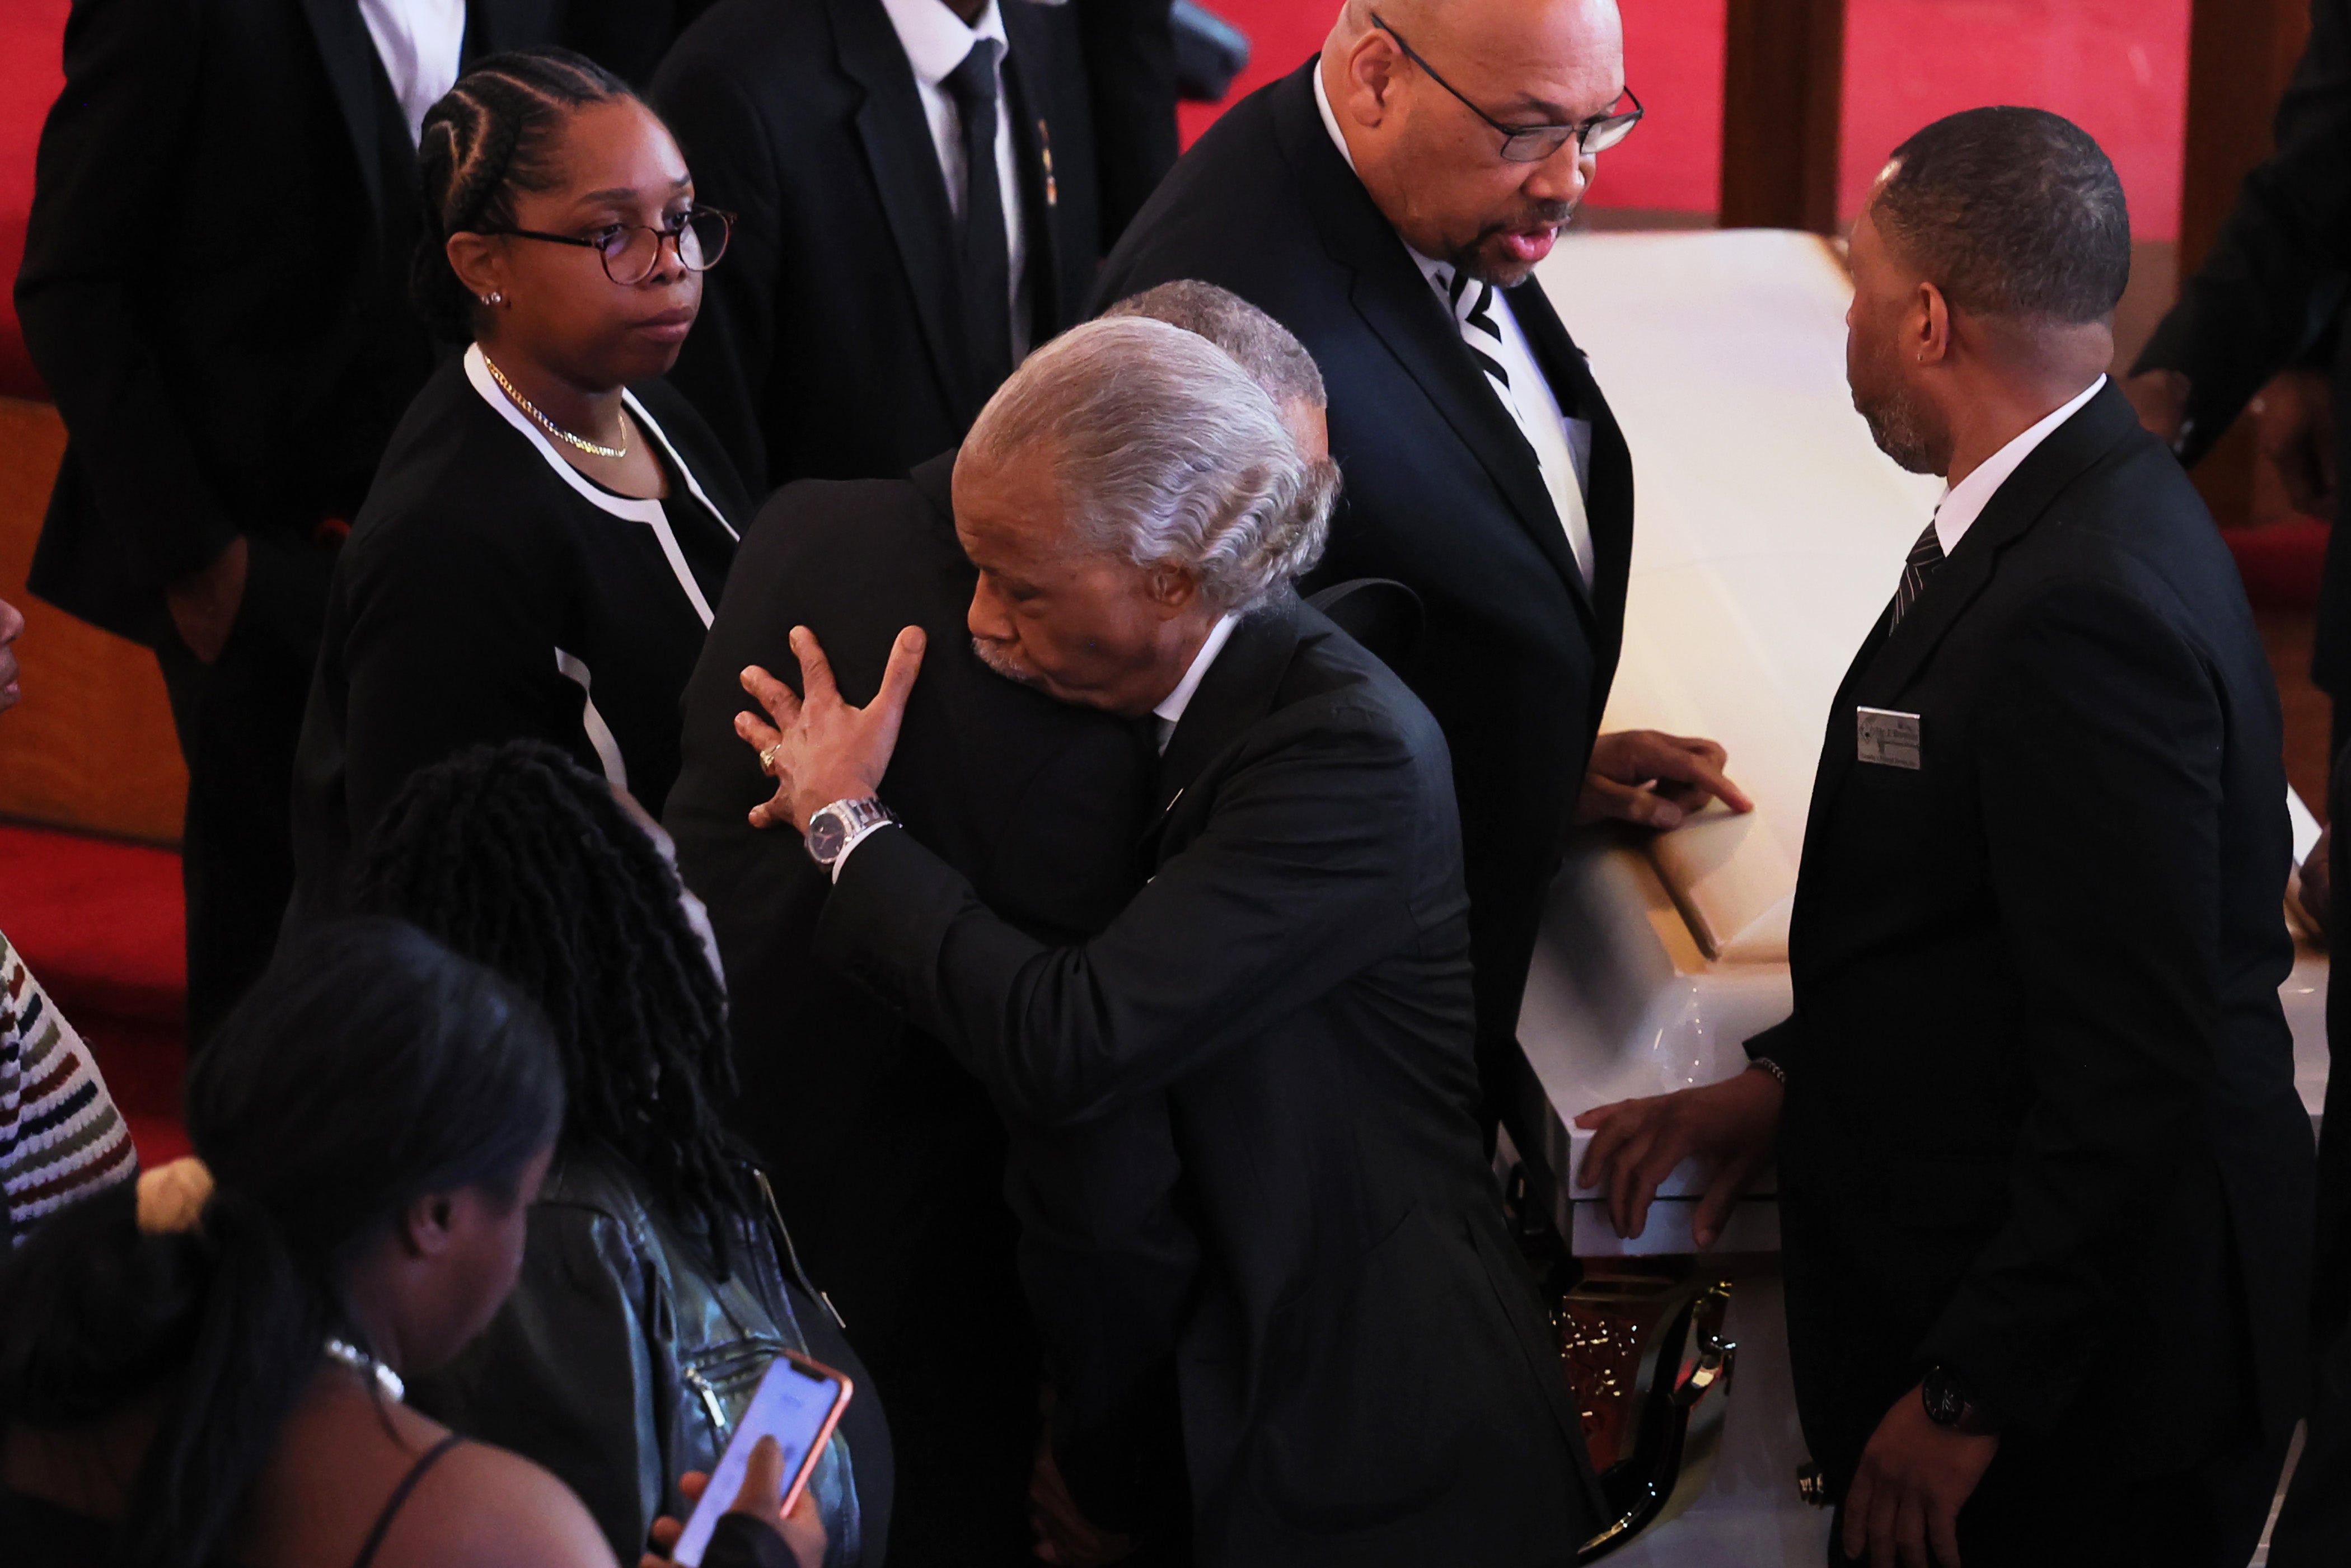 Andre Zachery, father of Jordan Neely, embraces the Reverend Al Sharpton at the conclusion of his son's public viewing and funeral service at Mount Neboh Baptist Church on May 19, 2023 in New York City